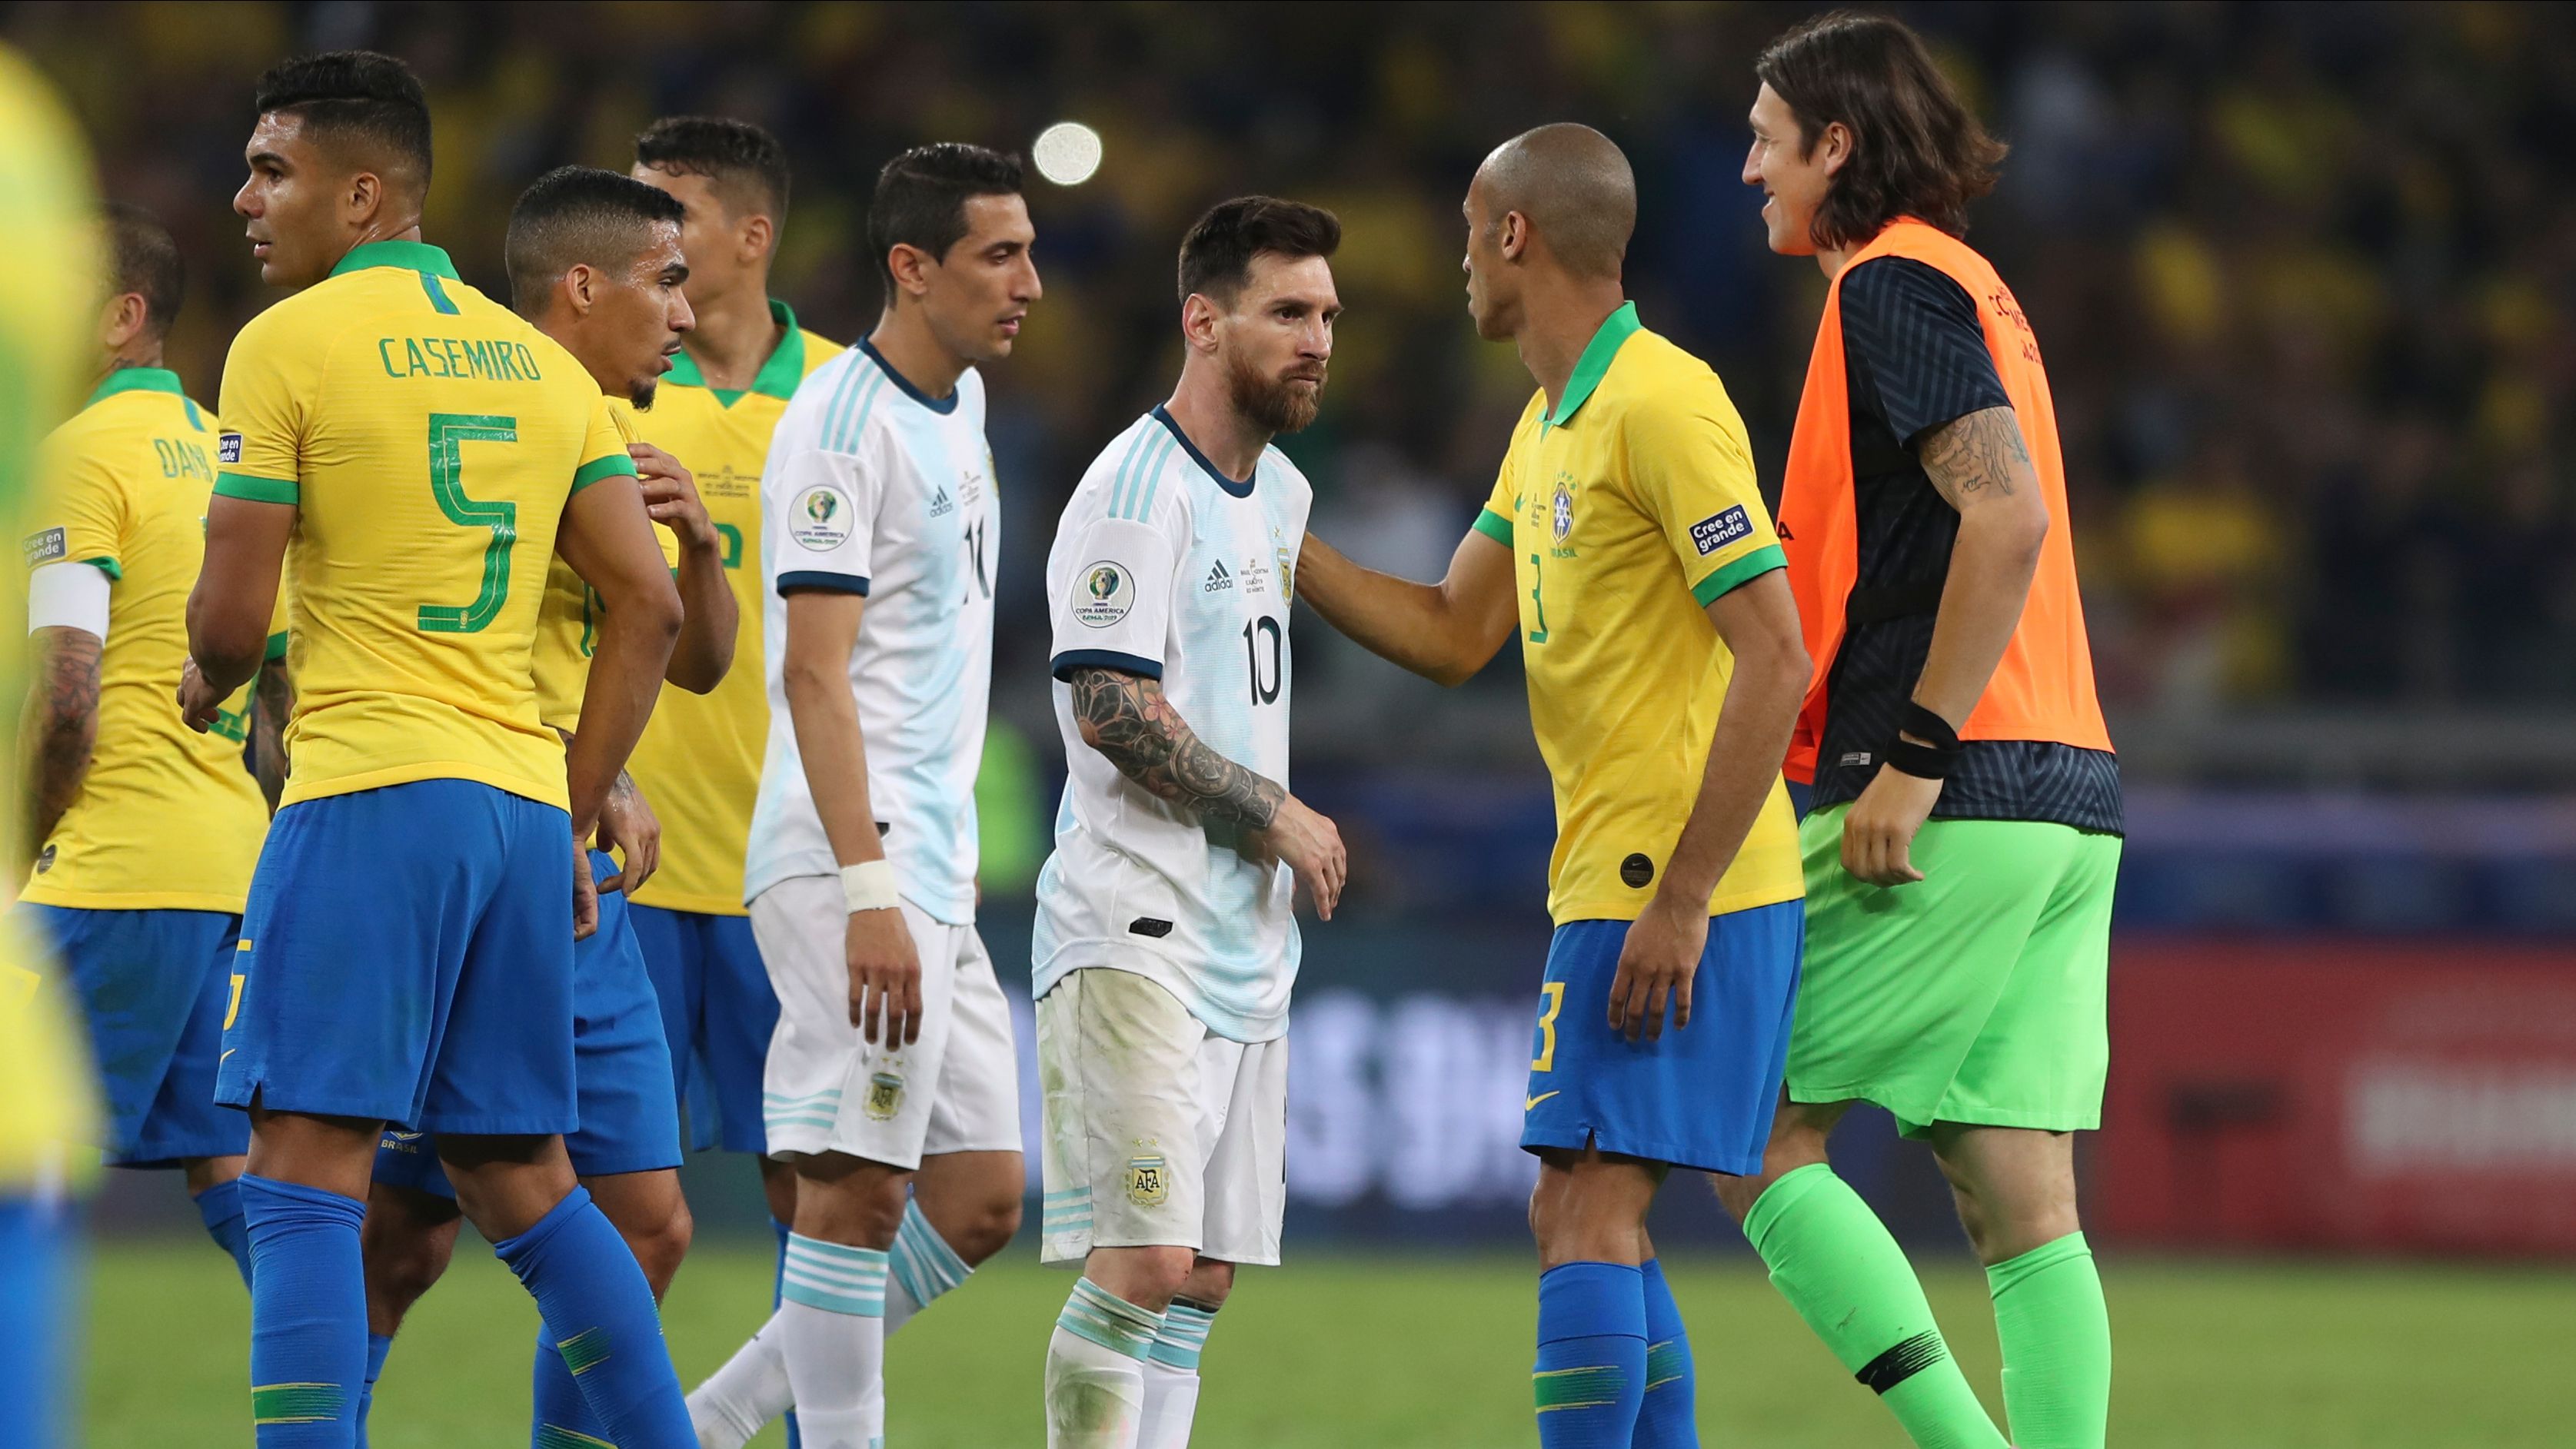 Brazil wins over Argentina by 2-0 to reach the final of Copa América ...